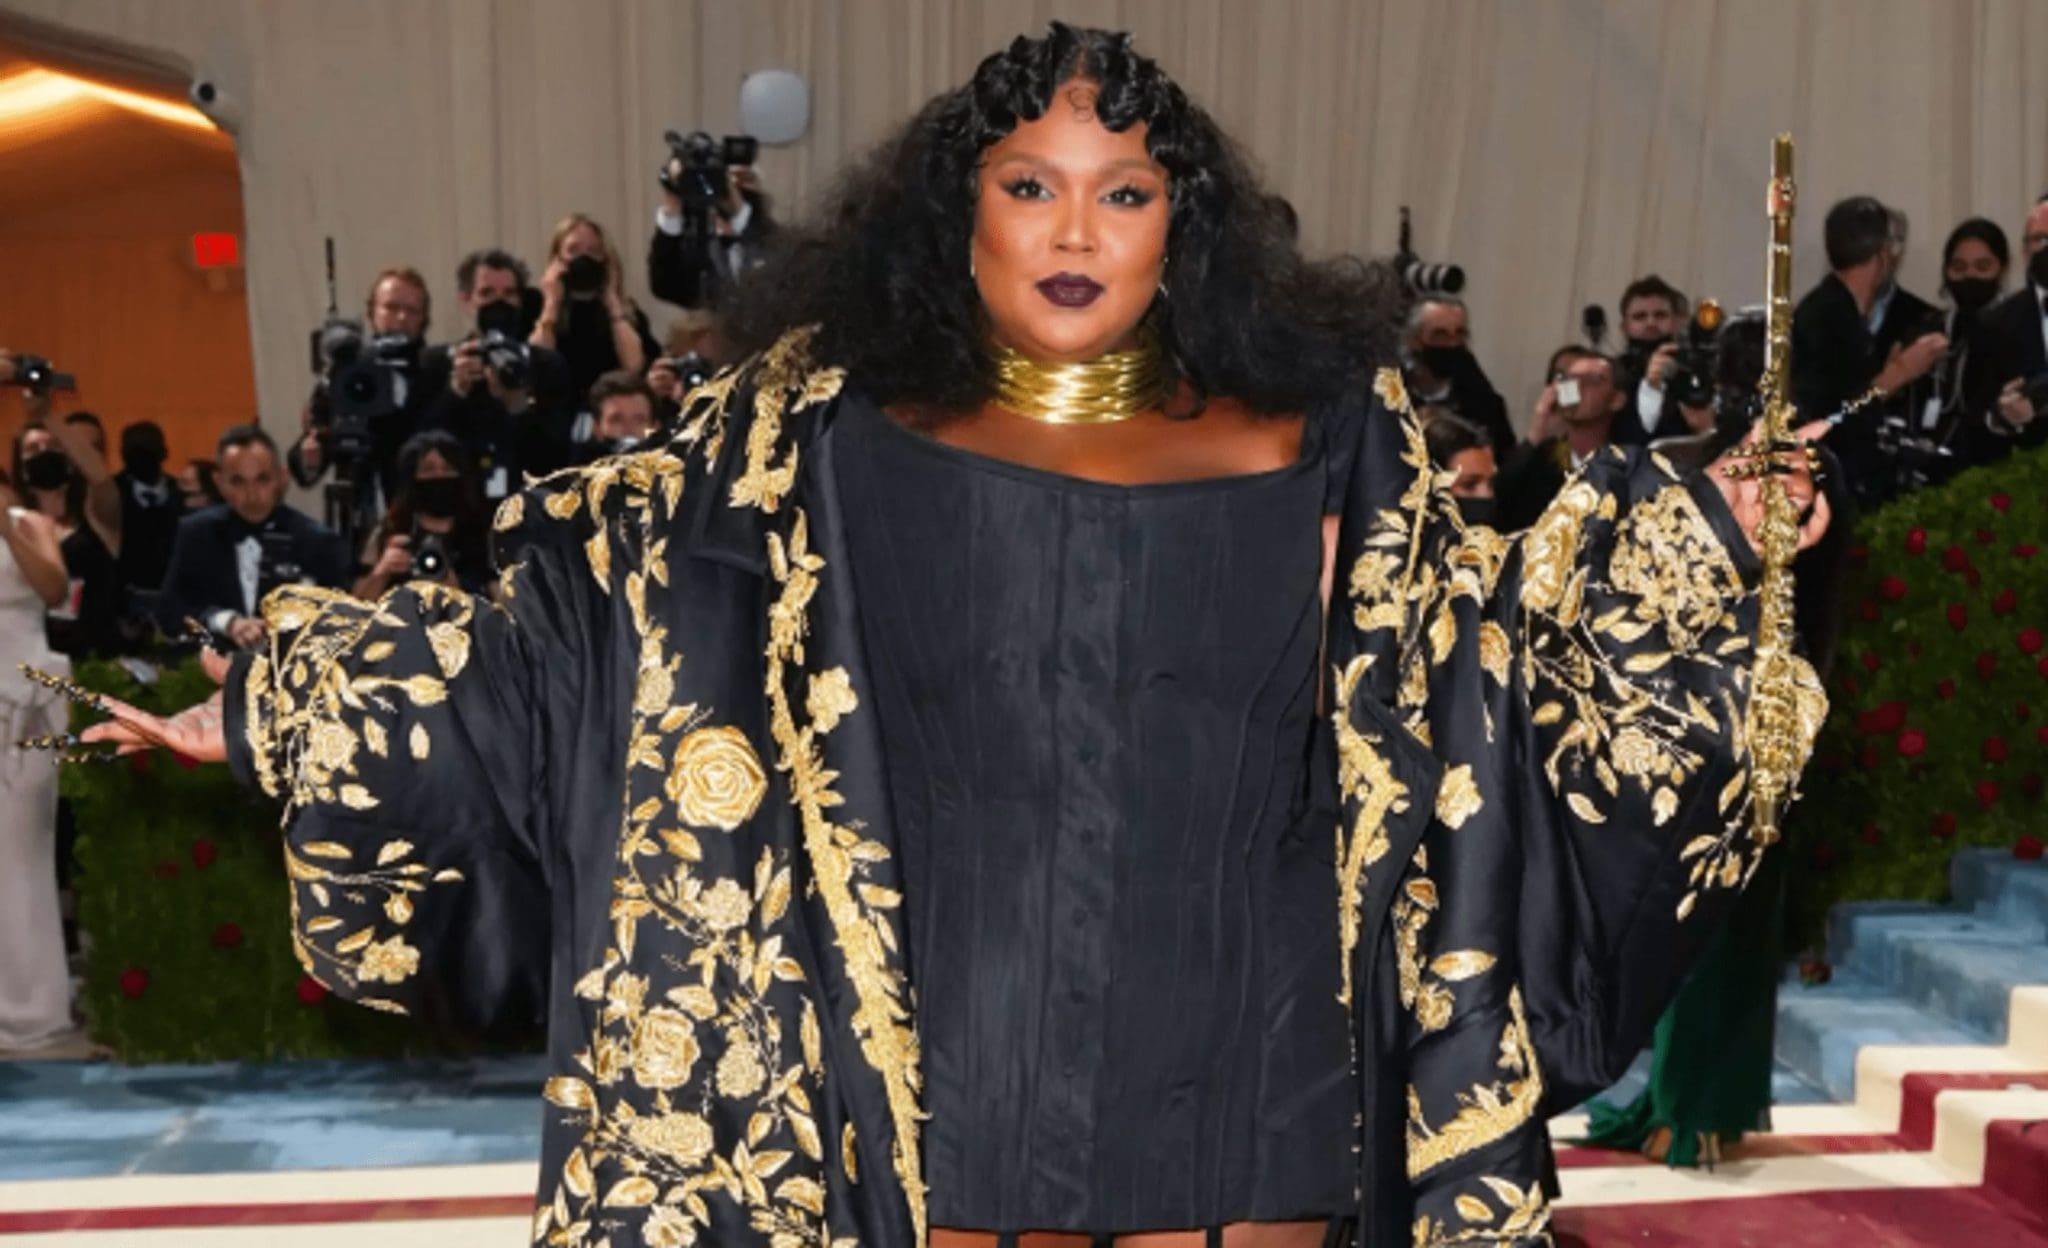 The Grammy winner Lizzo, has donated $1 million from the proceeds of her upcoming concert tour to the Planned Parenthood and Abortion Foundation